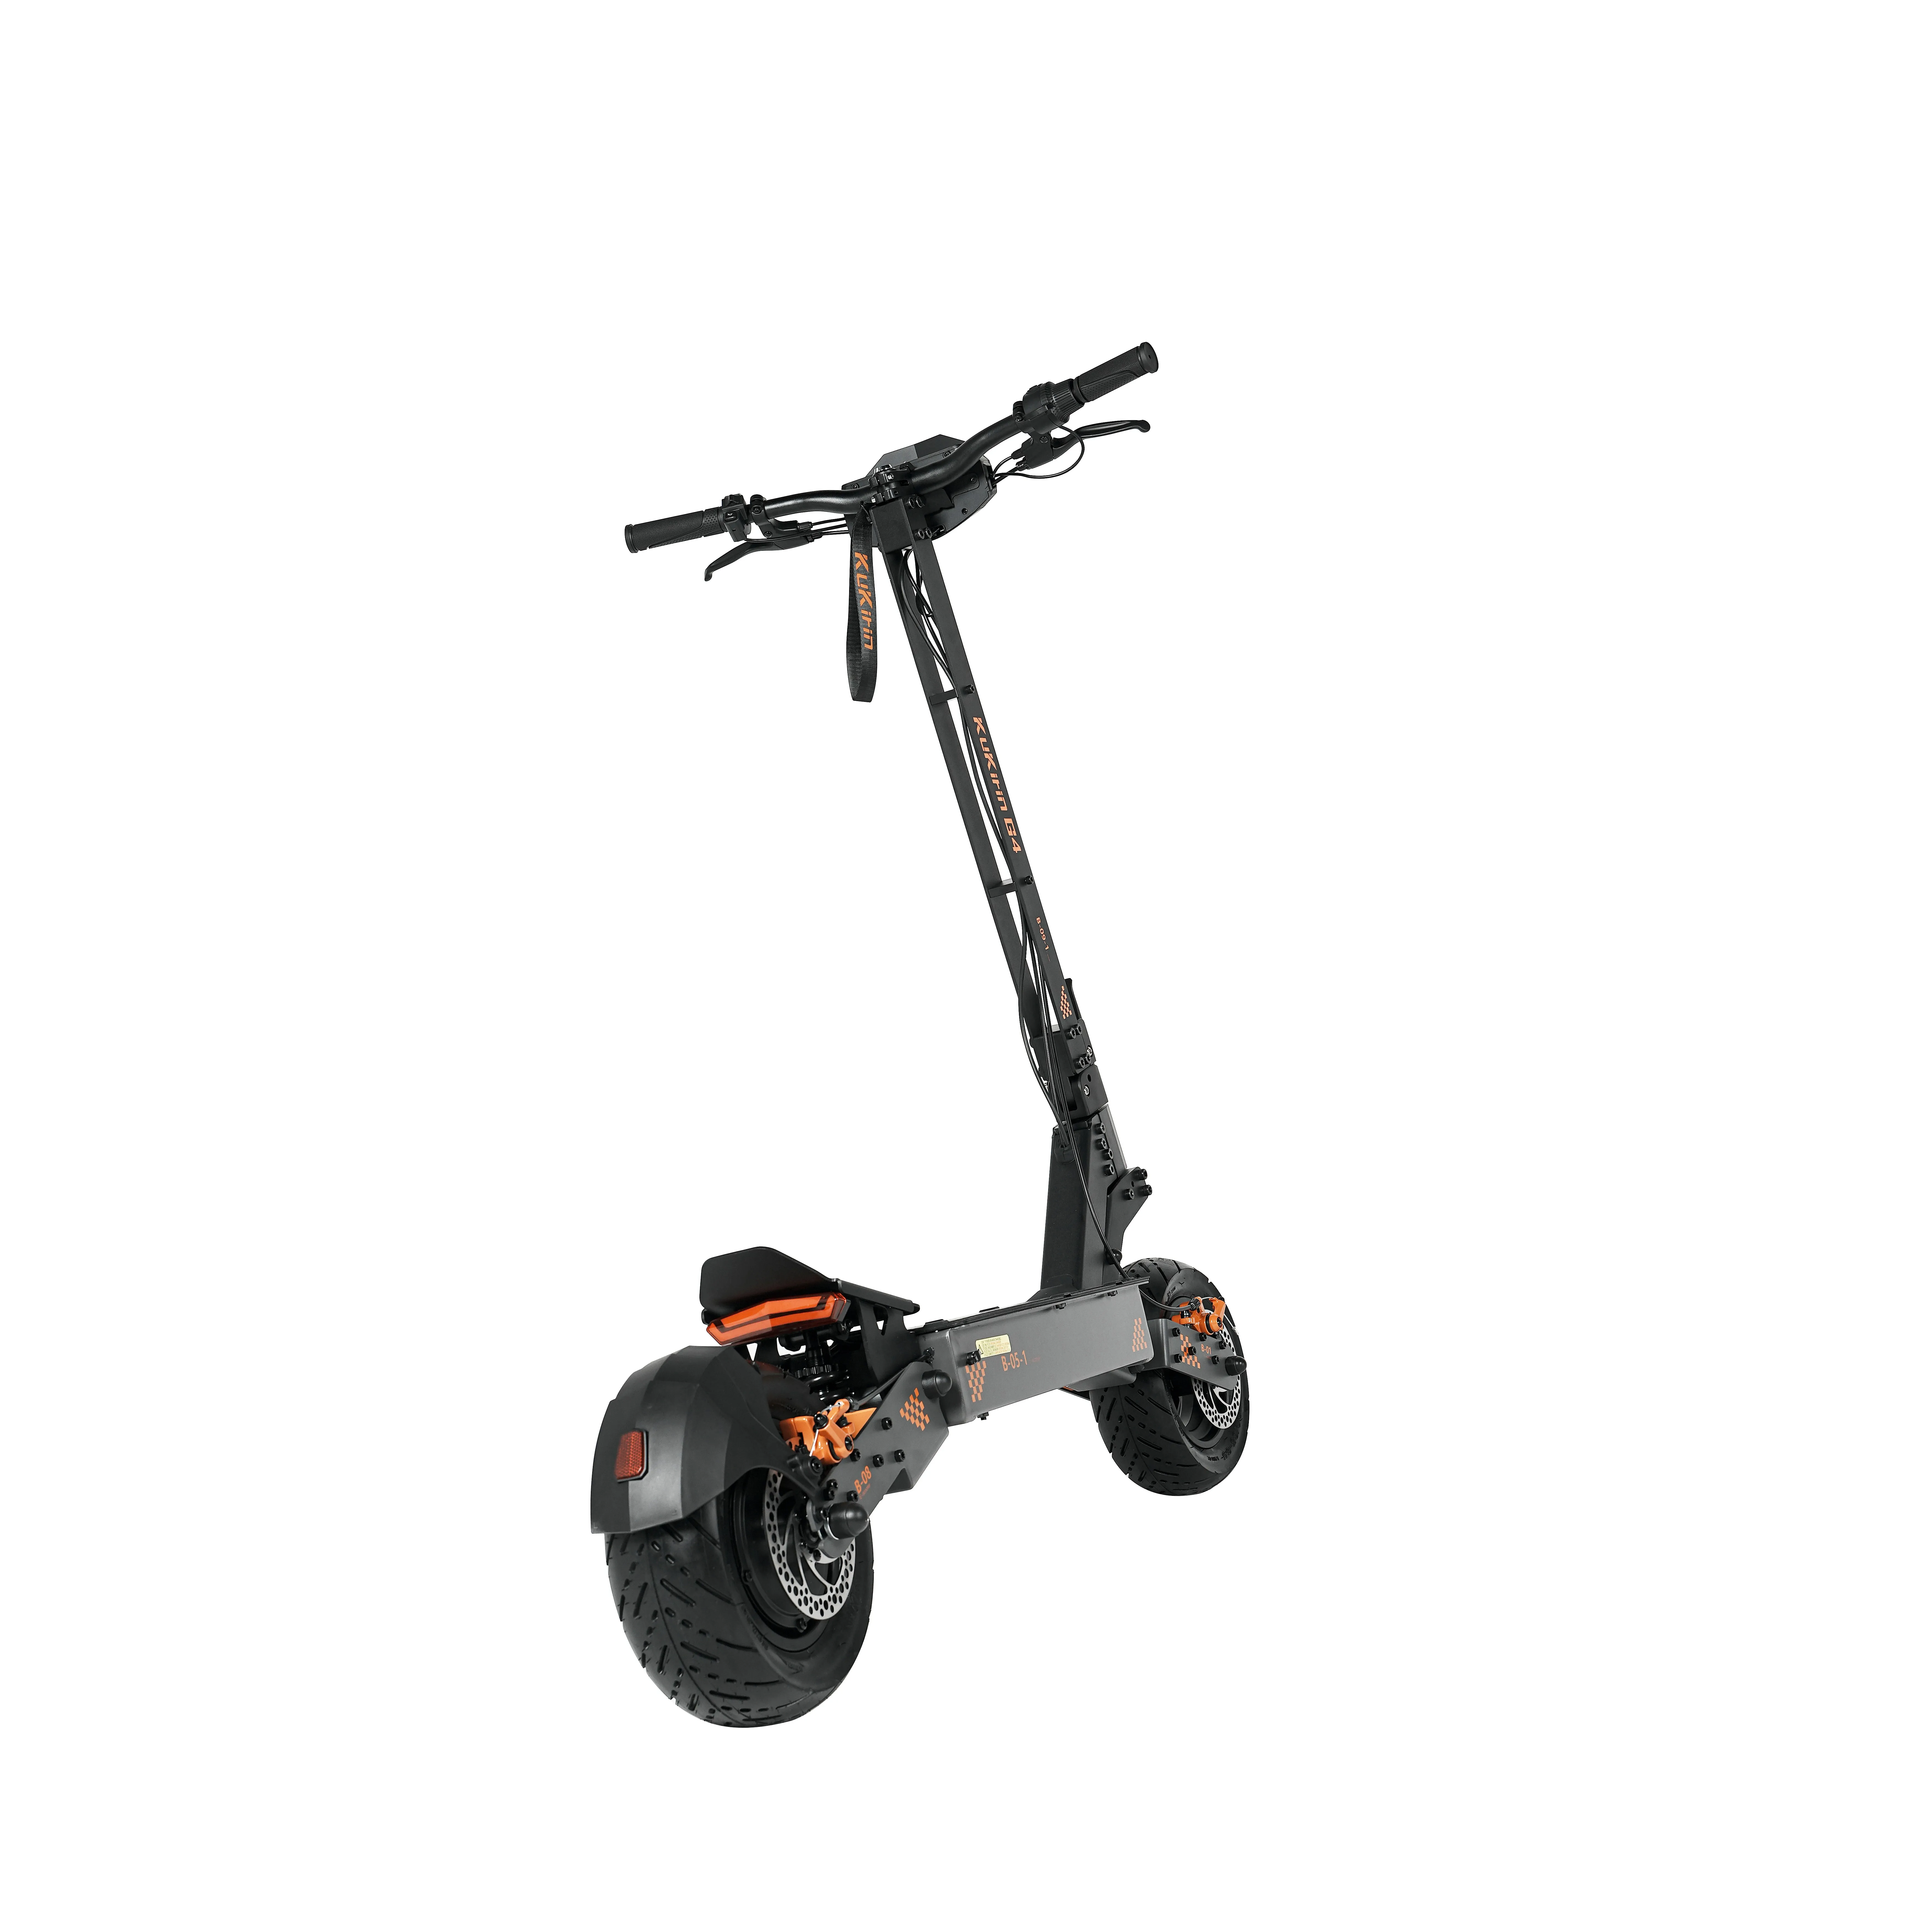 KuKirin G4 11 Inch Vacuum Tire e scooter 60V 20Ah Long Range Off Road High Speed electric scooter 2000w